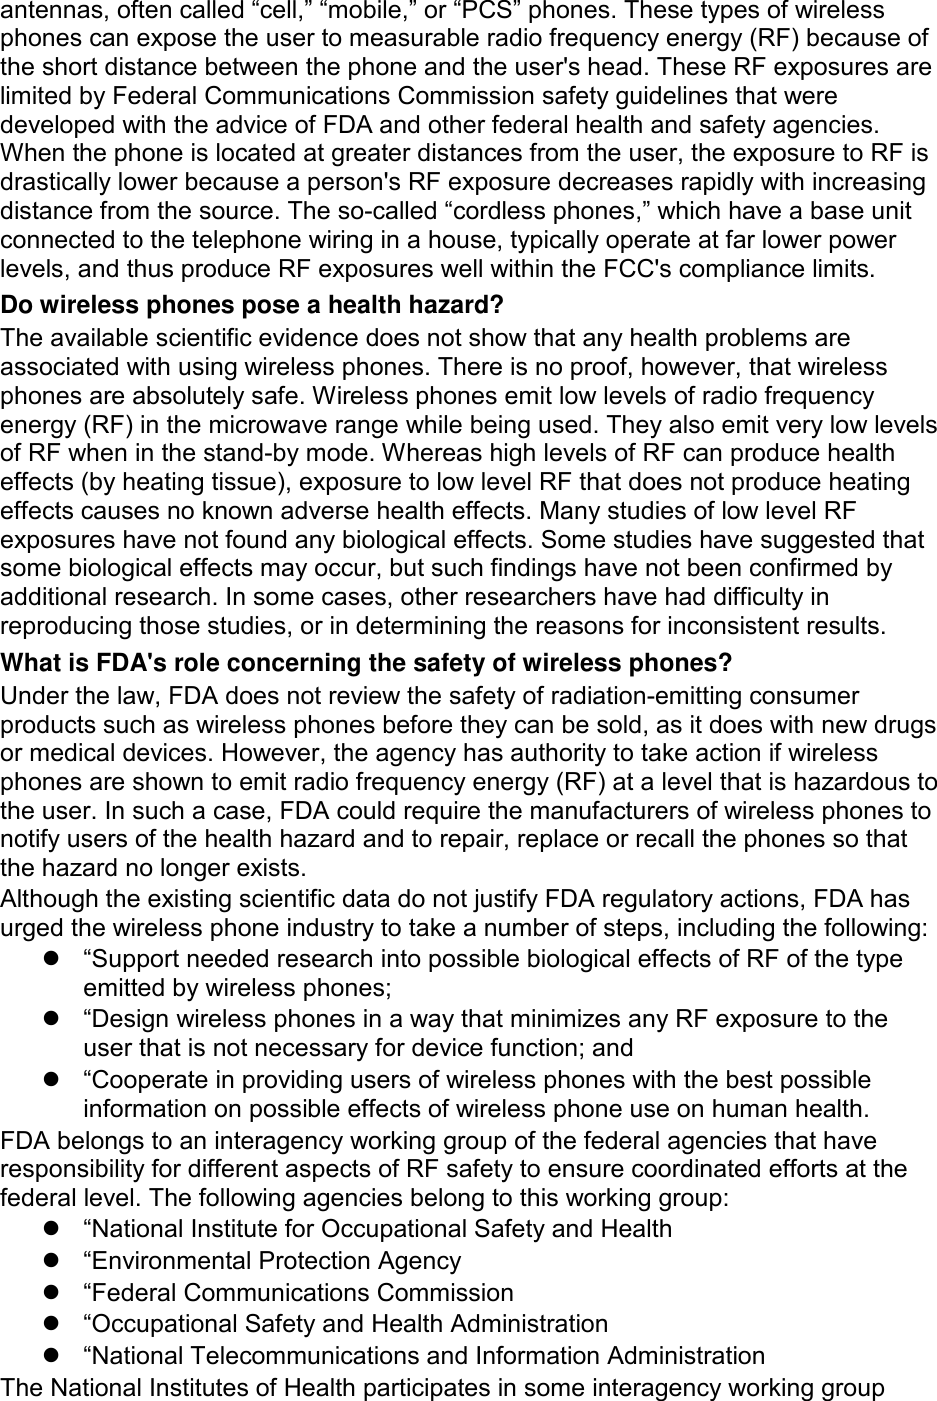 antennas, often called “cell,” “mobile,” or “PCS” phones. These types of wireless phones can expose the user to measurable radio frequency energy (RF) because of the short distance between the phone and the user&apos;s head. These RF exposures are limited by Federal Communications Commission safety guidelines that were developed with the advice of FDA and other federal health and safety agencies. When the phone is located at greater distances from the user, the exposure to RF is drastically lower because a person&apos;s RF exposure decreases rapidly with increasing distance from the source. The so-called “cordless phones,” which have a base unit connected to the telephone wiring in a house, typically operate at far lower power levels, and thus produce RF exposures well within the FCC&apos;s compliance limits. Do wireless phones pose a health hazard? The available scientific evidence does not show that any health problems are associated with using wireless phones. There is no proof, however, that wireless phones are absolutely safe. Wireless phones emit low levels of radio frequency energy (RF) in the microwave range while being used. They also emit very low levels of RF when in the stand-by mode. Whereas high levels of RF can produce health effects (by heating tissue), exposure to low level RF that does not produce heating effects causes no known adverse health effects. Many studies of low level RF exposures have not found any biological effects. Some studies have suggested that some biological effects may occur, but such findings have not been confirmed by additional research. In some cases, other researchers have had difficulty in reproducing those studies, or in determining the reasons for inconsistent results. What is FDA&apos;s role concerning the safety of wireless phones? Under the law, FDA does not review the safety of radiation-emitting consumer products such as wireless phones before they can be sold, as it does with new drugs or medical devices. However, the agency has authority to take action if wireless phones are shown to emit radio frequency energy (RF) at a level that is hazardous to the user. In such a case, FDA could require the manufacturers of wireless phones to notify users of the health hazard and to repair, replace or recall the phones so that the hazard no longer exists. Although the existing scientific data do not justify FDA regulatory actions, FDA has urged the wireless phone industry to take a number of steps, including the following:  “Support needed research into possible biological effects of RF of the type emitted by wireless phones;  “Design wireless phones in a way that minimizes any RF exposure to the user that is not necessary for device function; and  “Cooperate in providing users of wireless phones with the best possible information on possible effects of wireless phone use on human health. FDA belongs to an interagency working group of the federal agencies that have responsibility for different aspects of RF safety to ensure coordinated efforts at the federal level. The following agencies belong to this working group:  “National Institute for Occupational Safety and Health  “Environmental Protection Agency  “Federal Communications Commission  “Occupational Safety and Health Administration  “National Telecommunications and Information Administration The National Institutes of Health participates in some interagency working group 